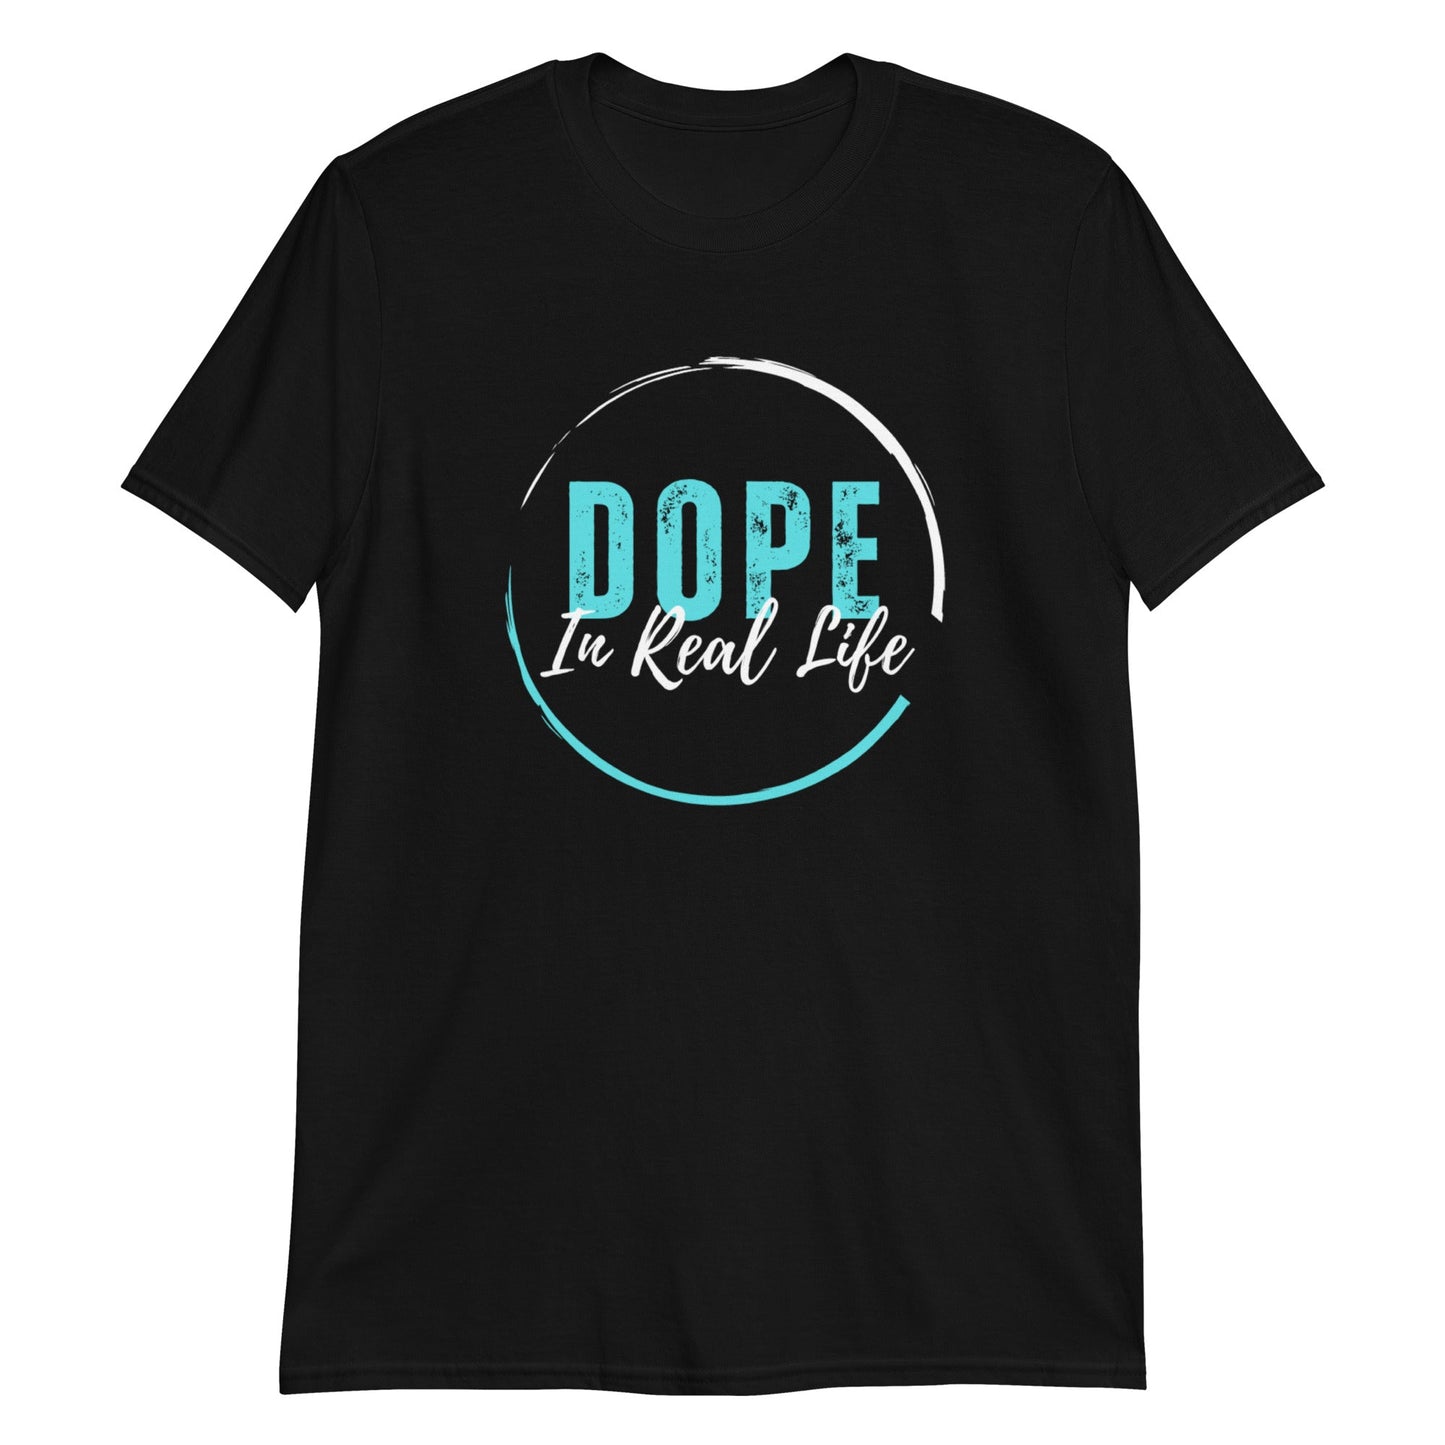 Dope In Real Life Short-Sleeve Unisex T-Shirt (For a Slim Fit Order A Size Down) - Catch This Tea Shirts